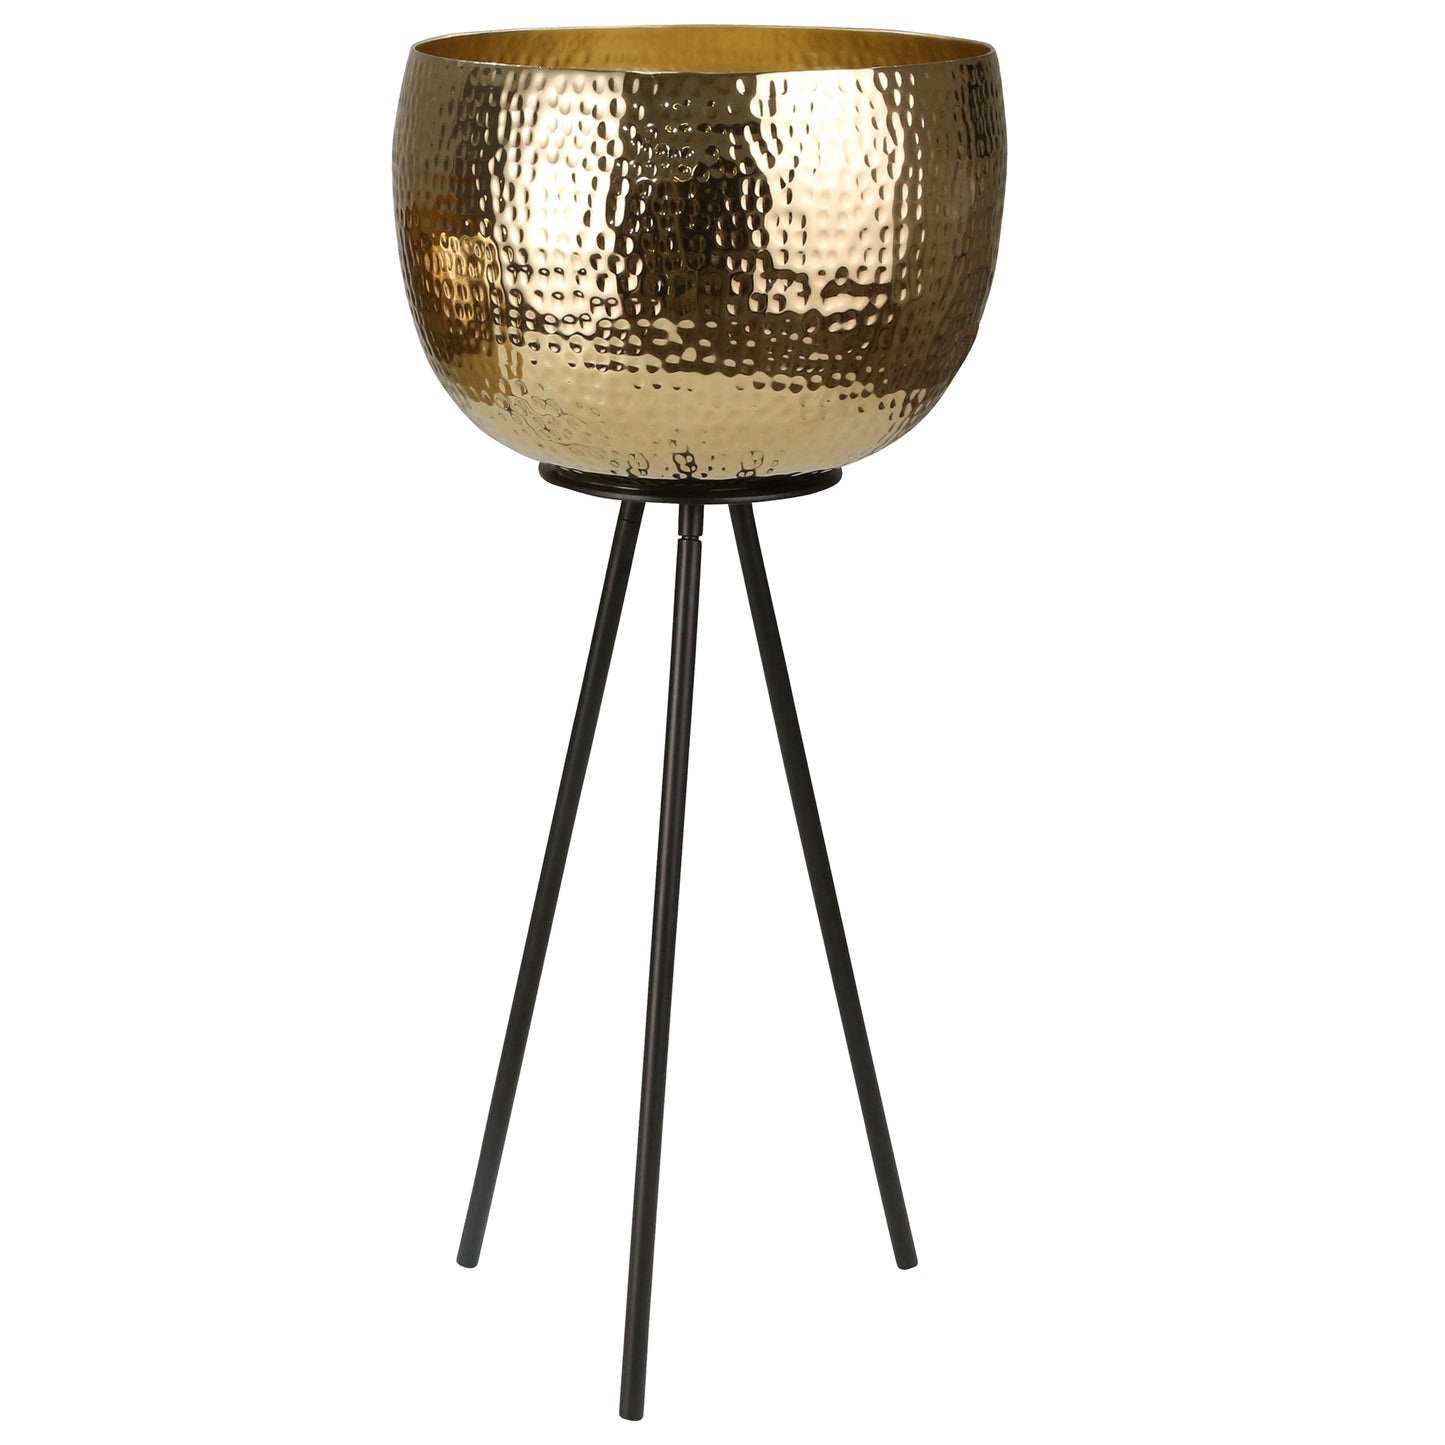 Hammered Textured Metal Bowl Planters on Tripod Base, Set of 2, Gold and Black